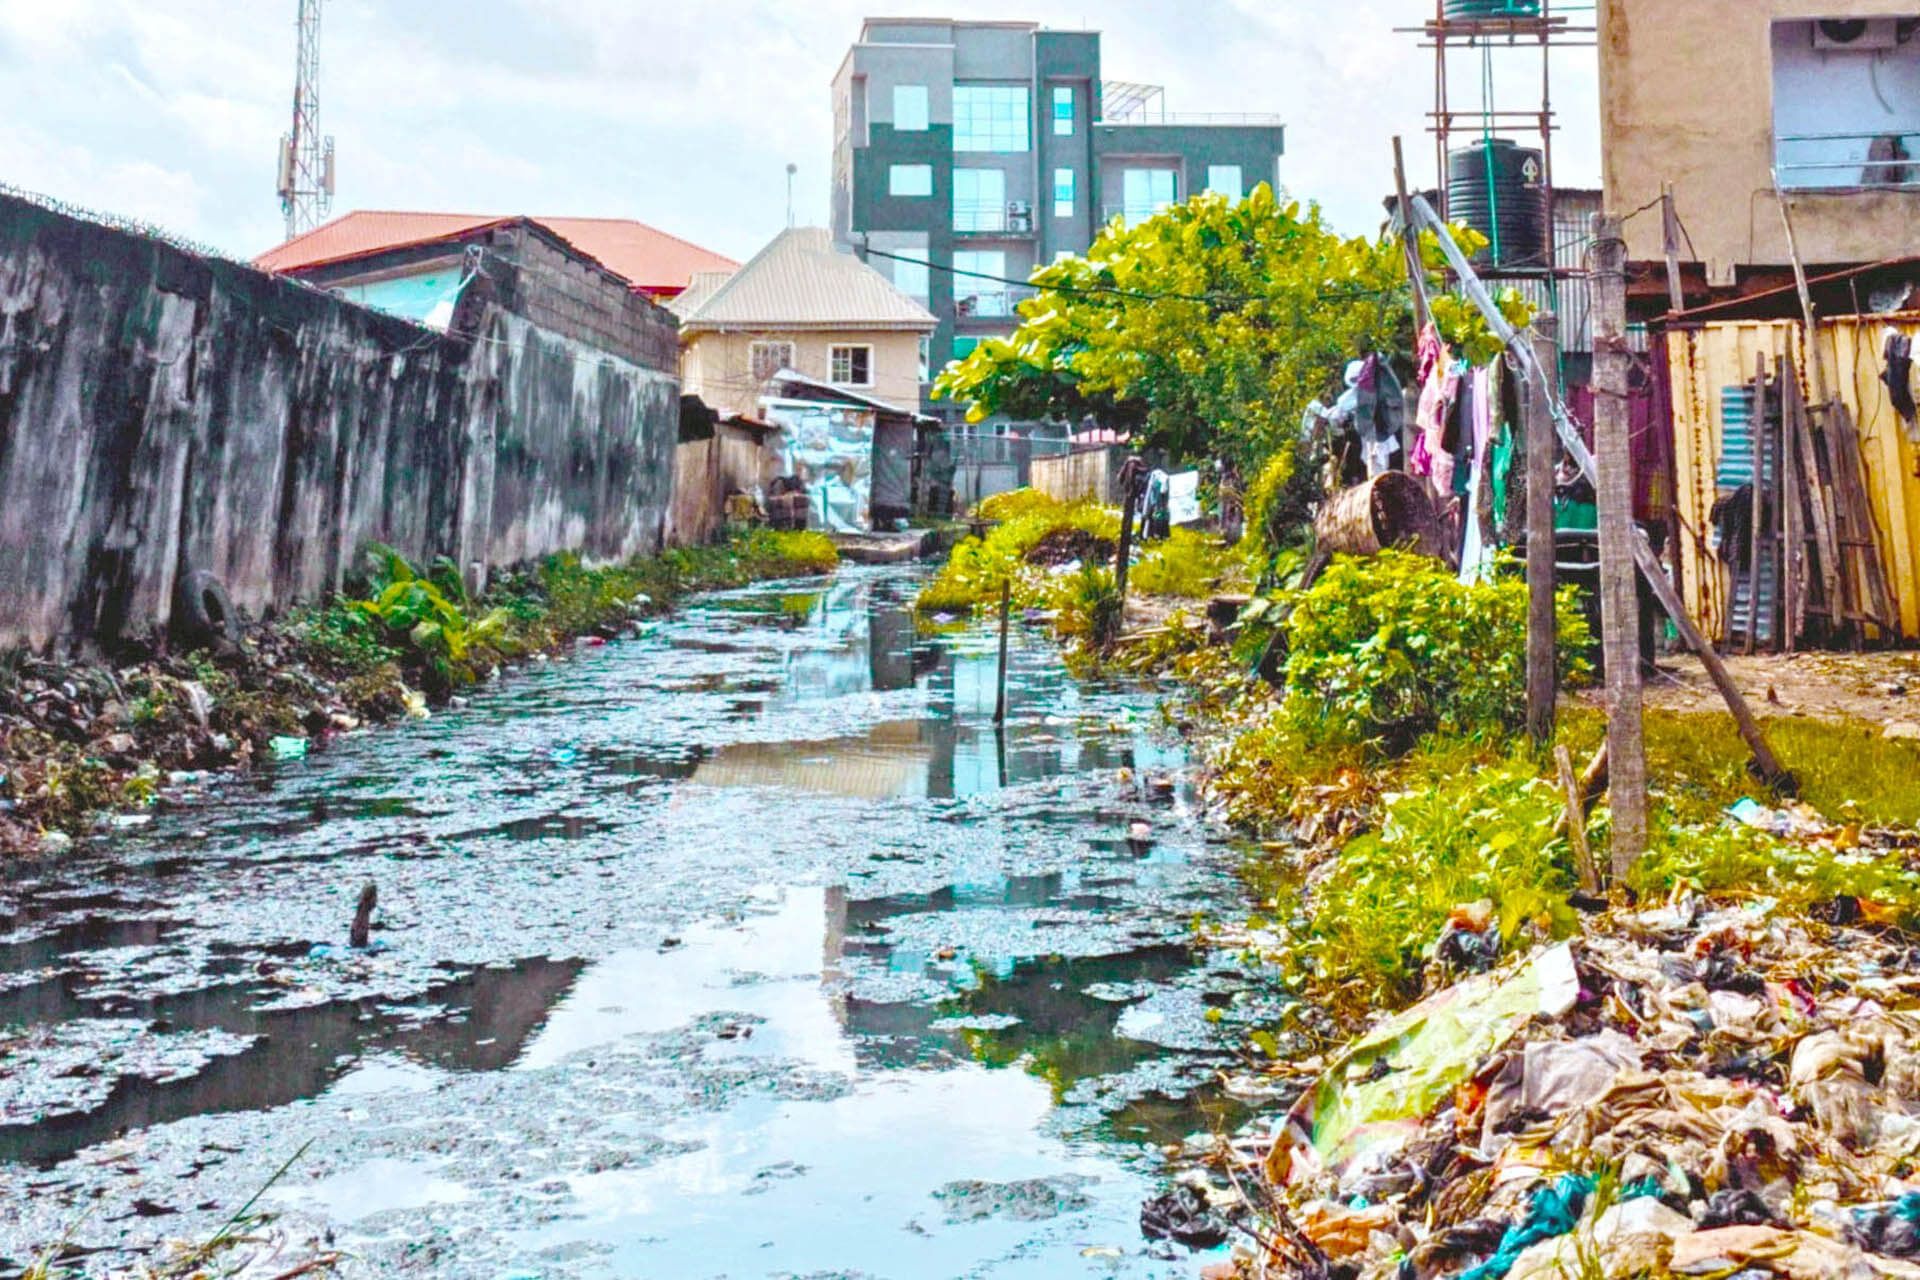 Flooding crisis a threat to public health in Lagos